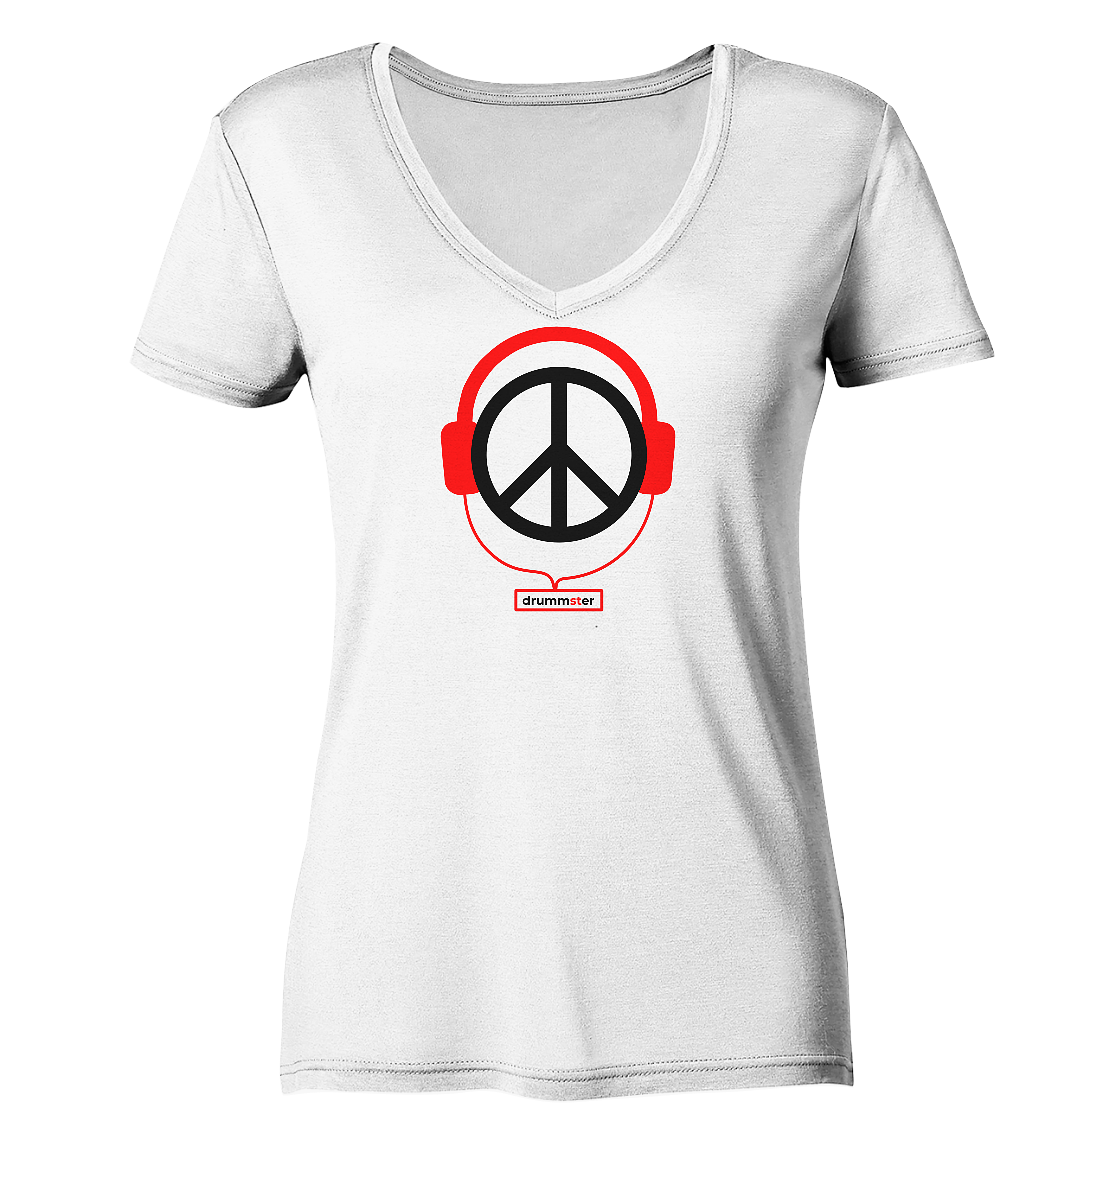 sound of peace - ladies v-neck shirt | various colors